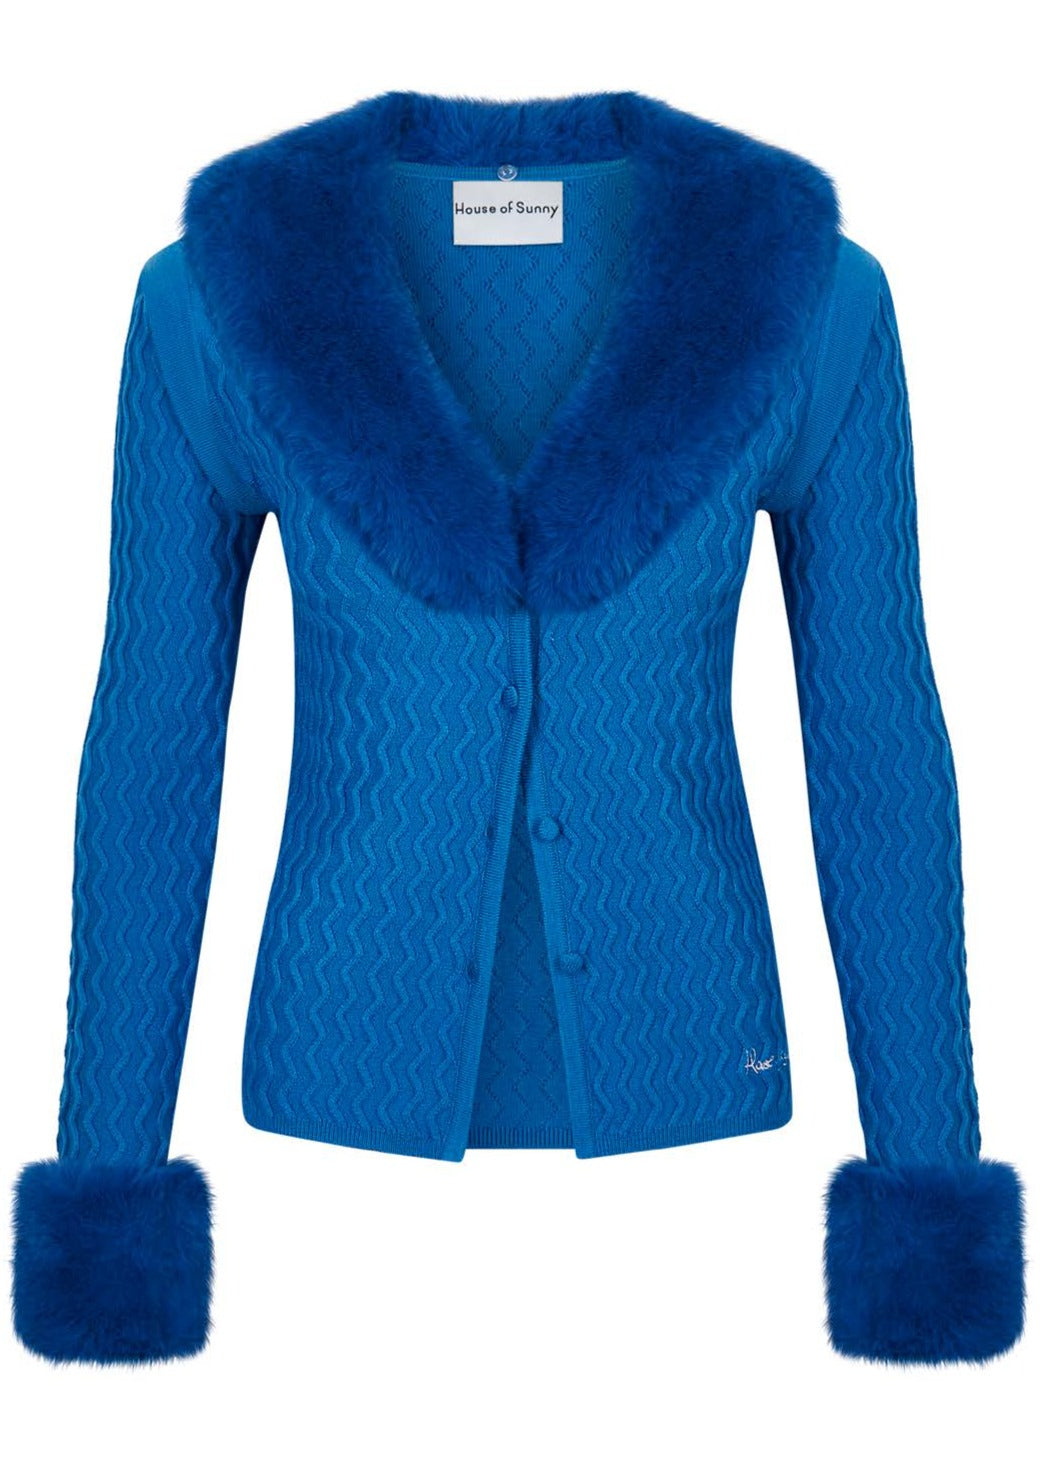 Blue Wave rib cardi with detachable fur from the brand House Of Sunny